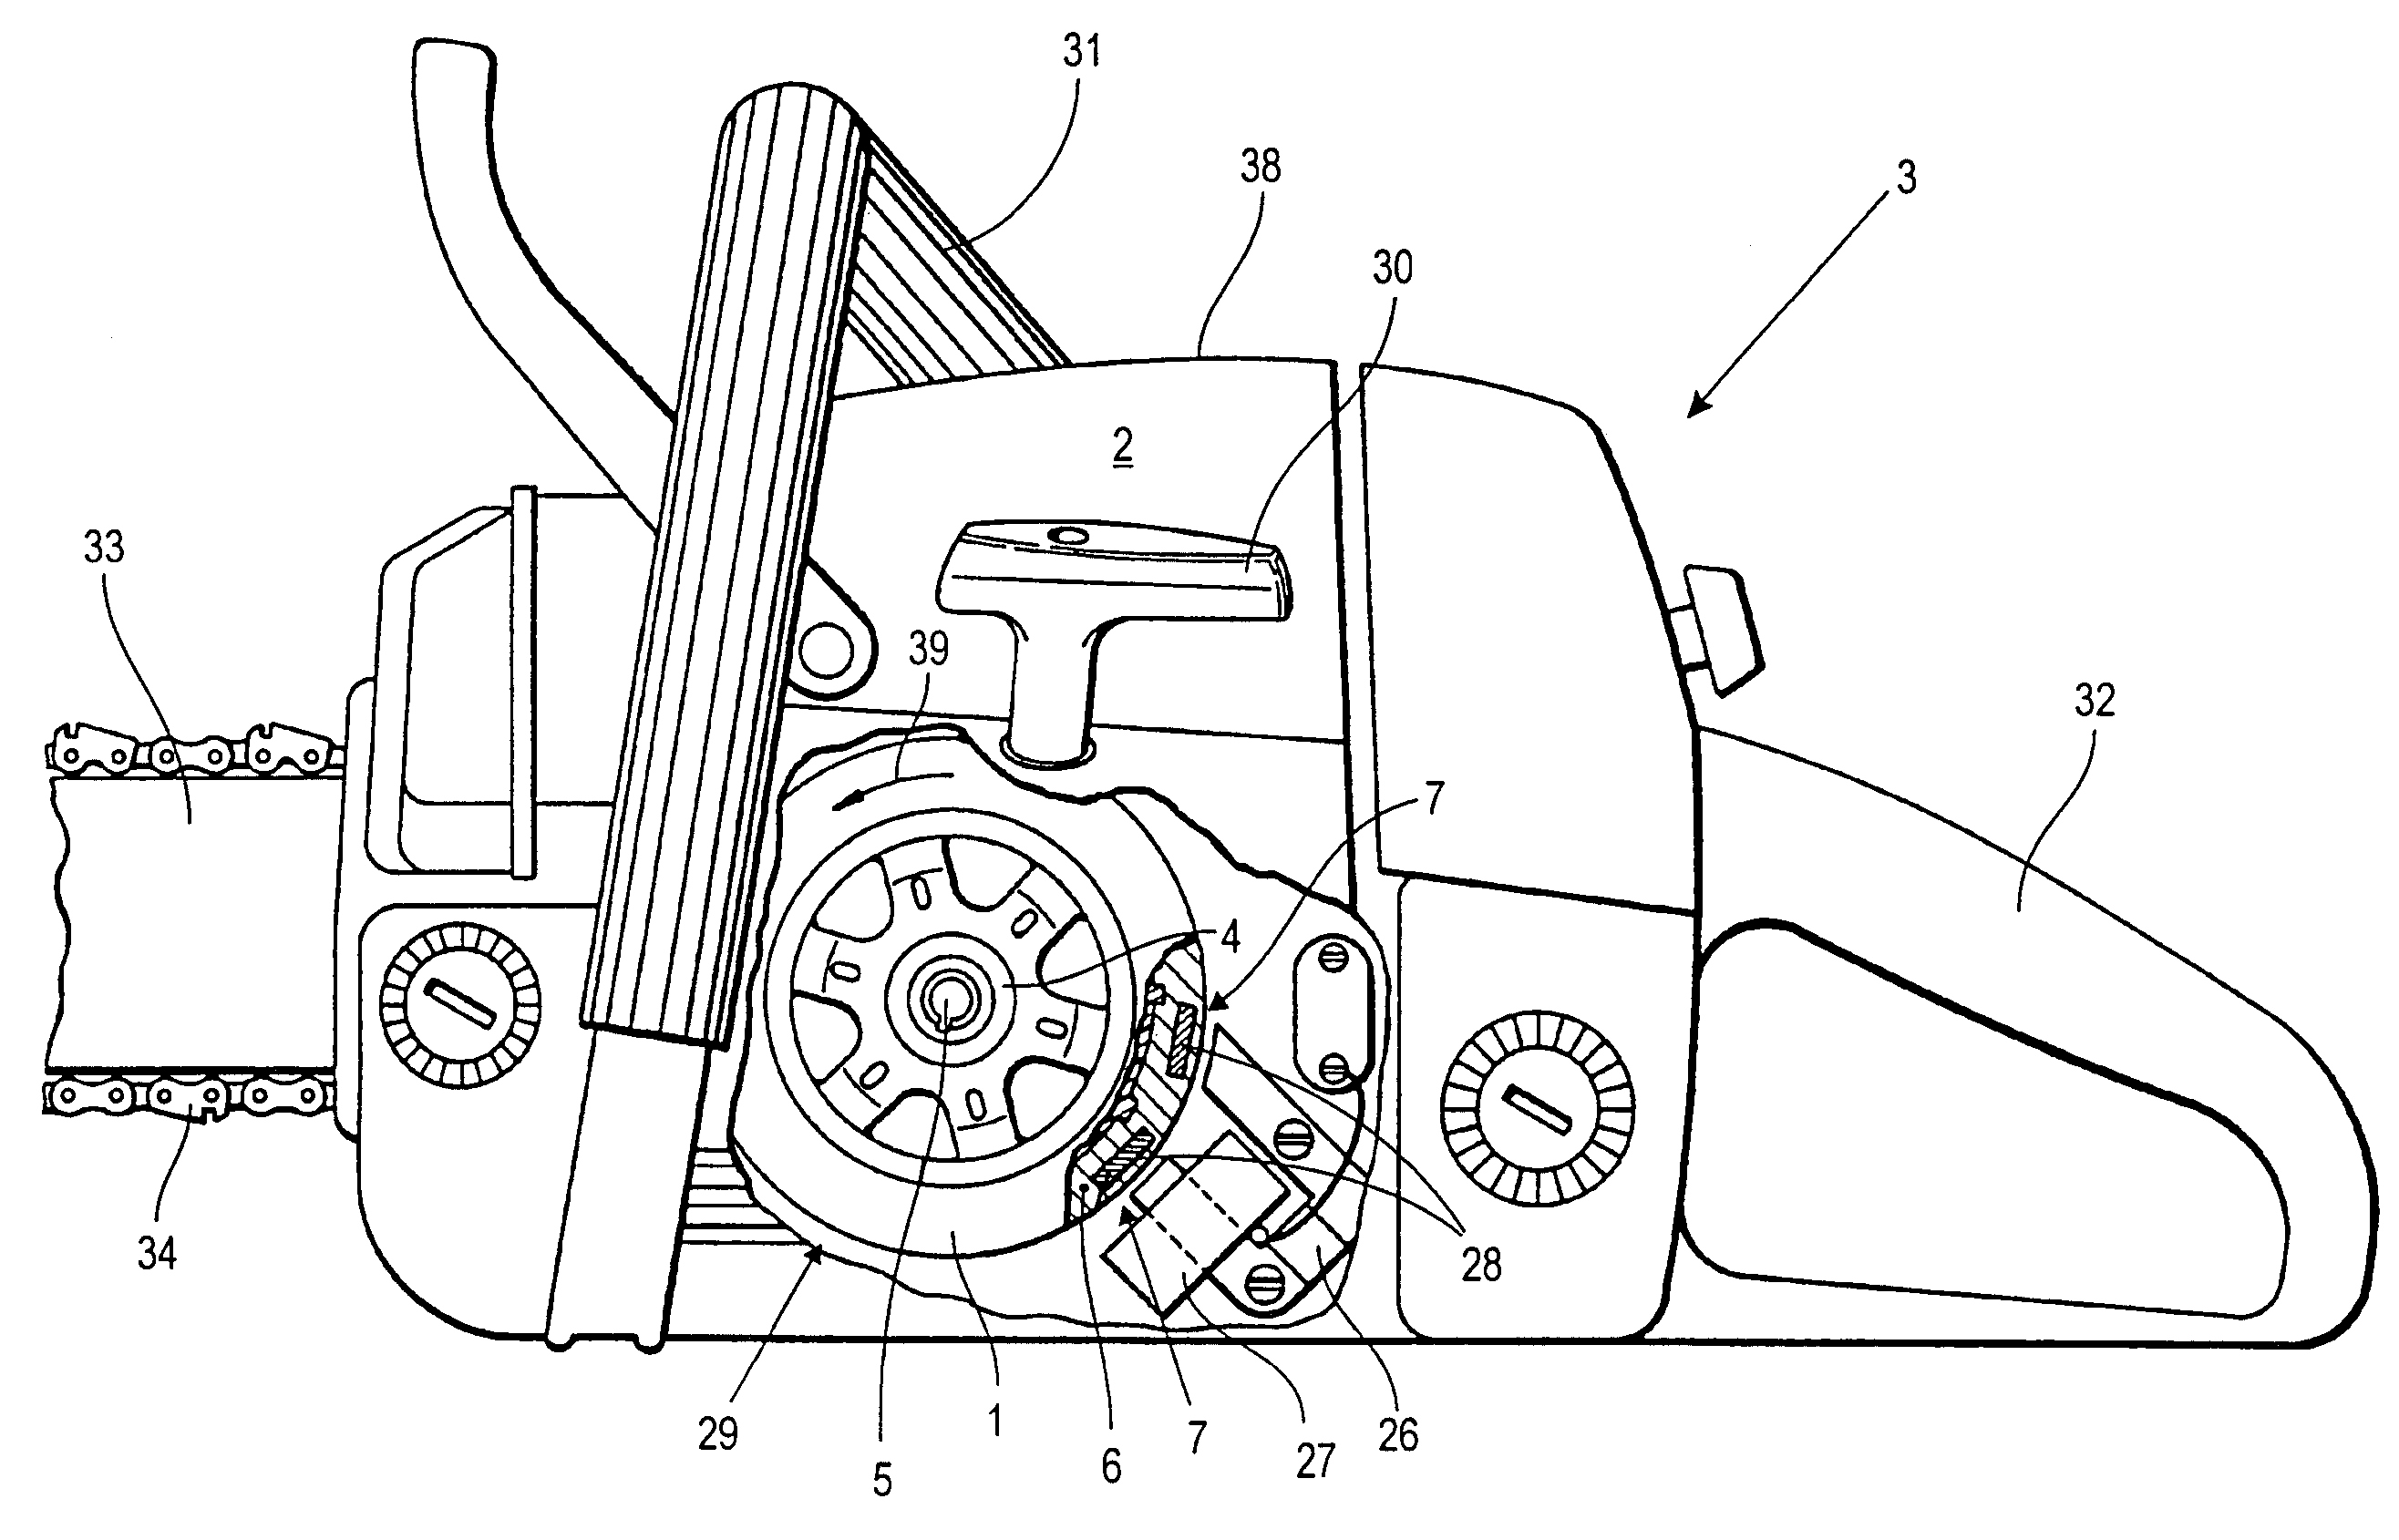 Magnet wheel of an internal combustion engine